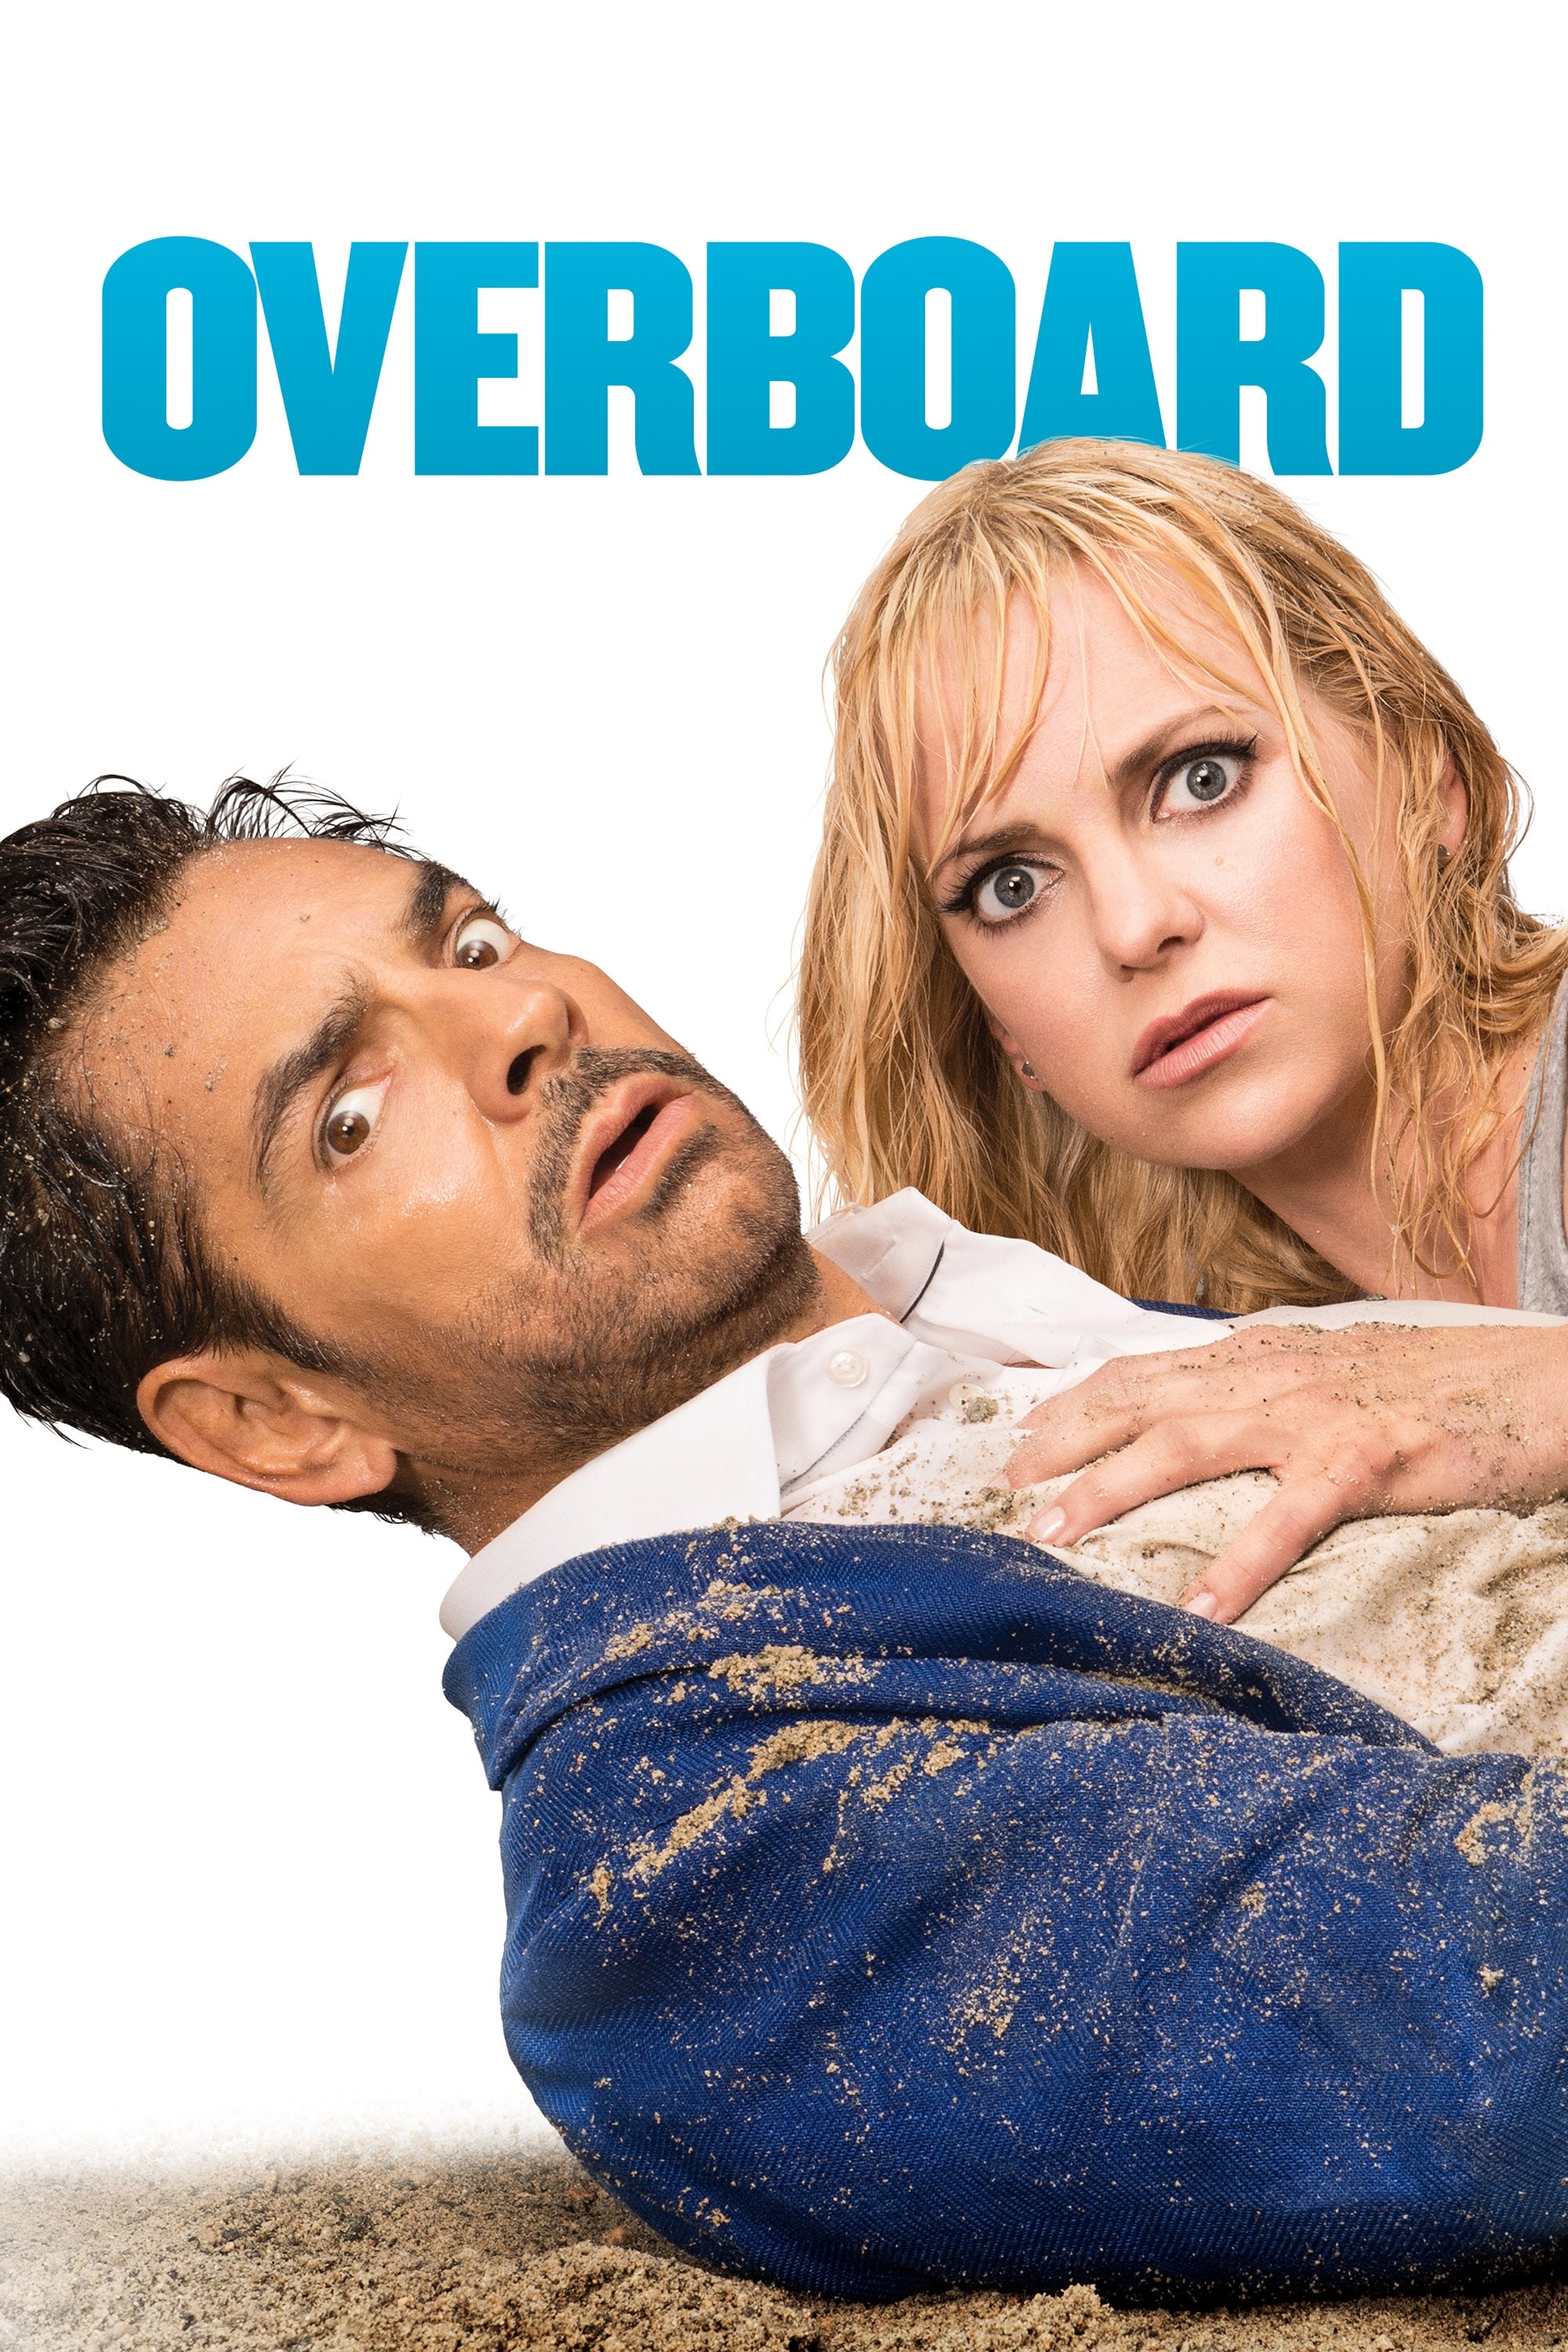 cruise ship overboard movie